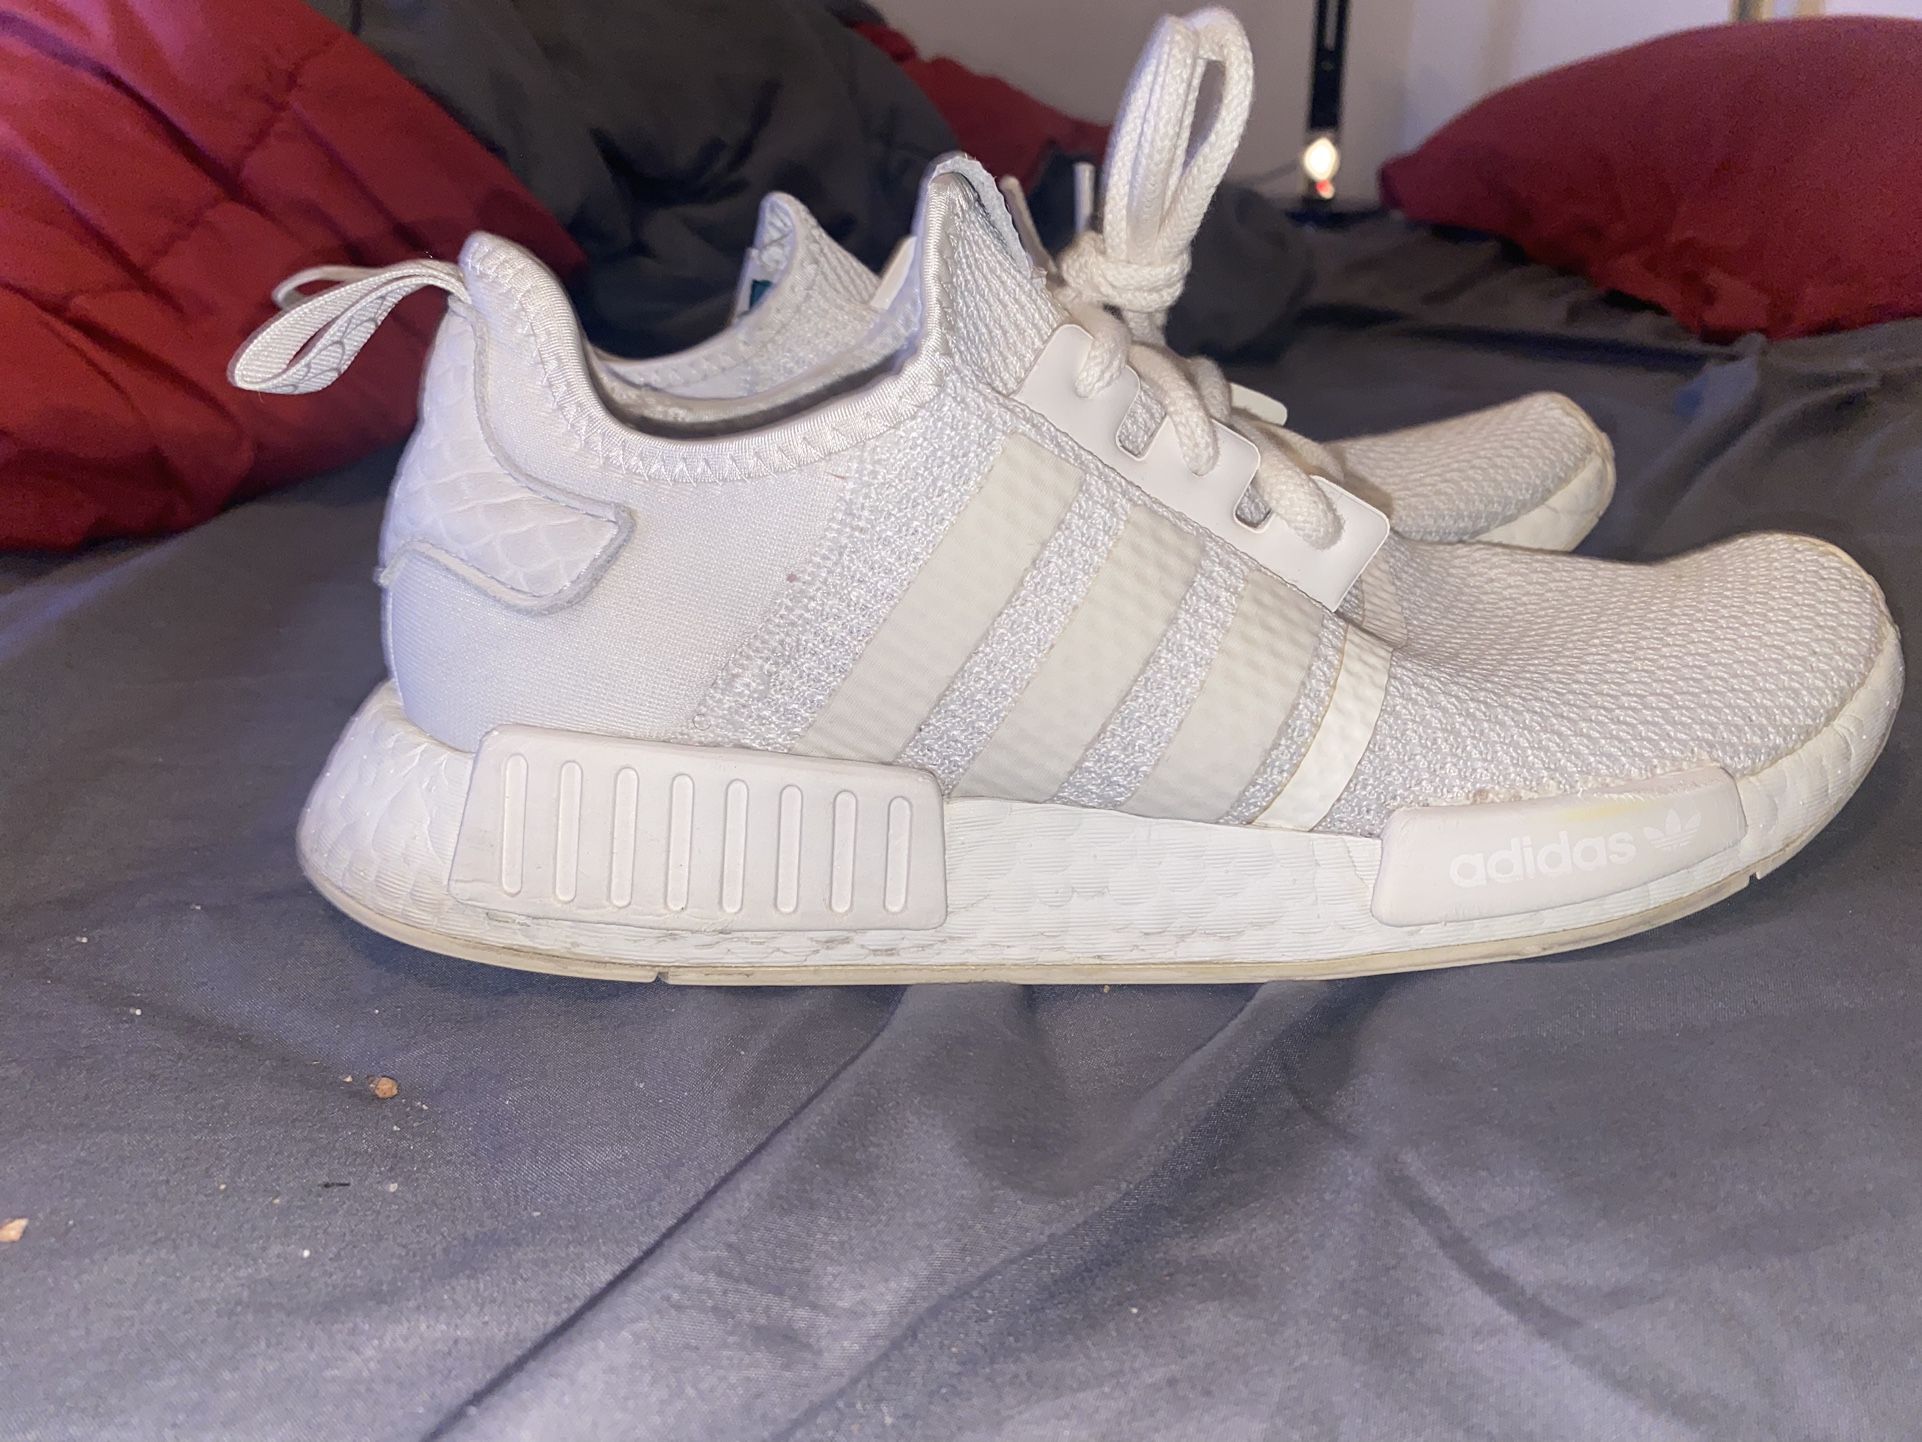 Size - adidas NMD R1 Triple White - FY9384 for Sale in Houston, TX - OfferUp